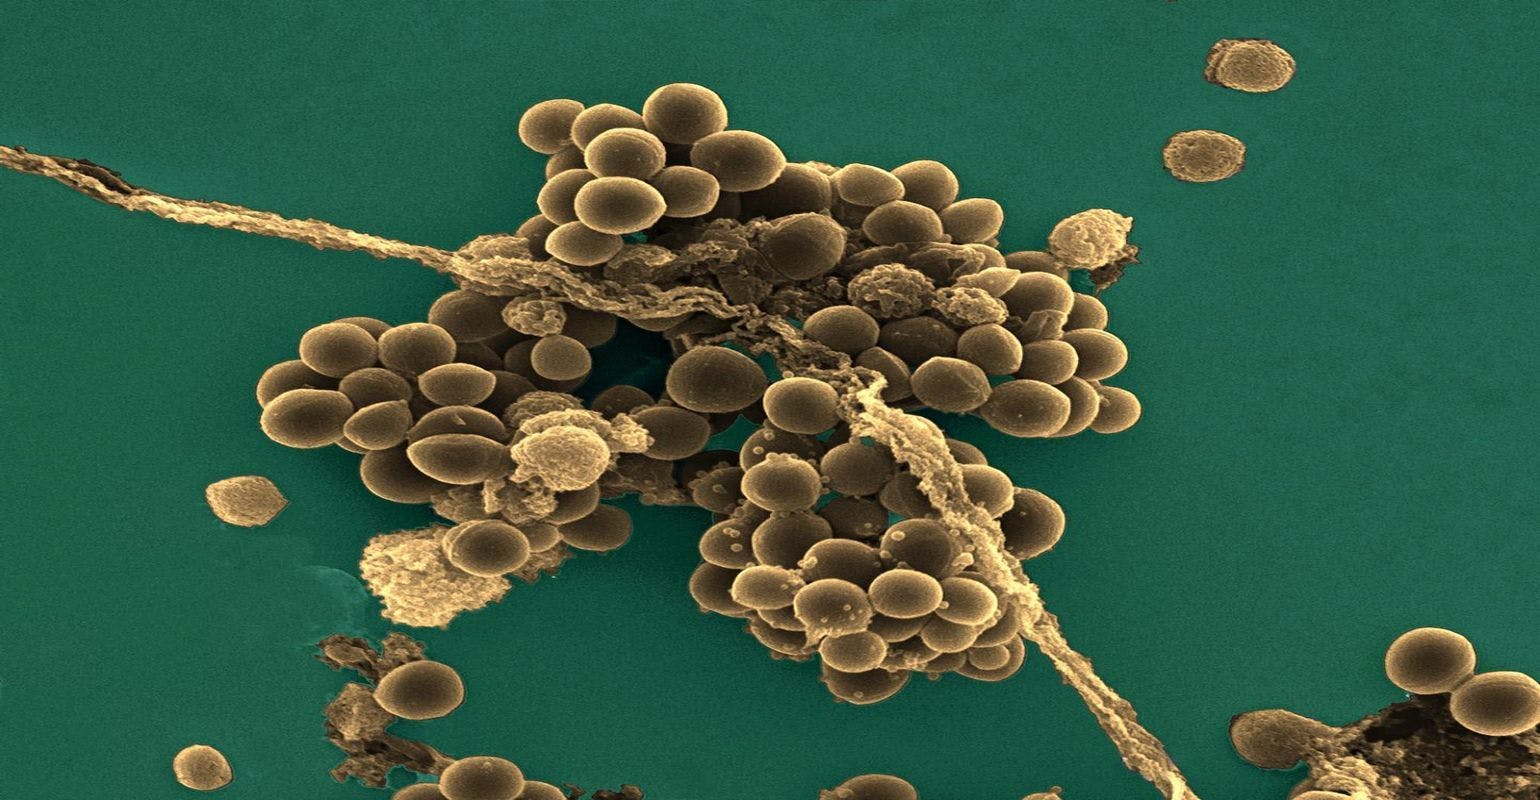 Treatment for MRSA No Longer More Costly Than for Susceptible Staph aureus Infections